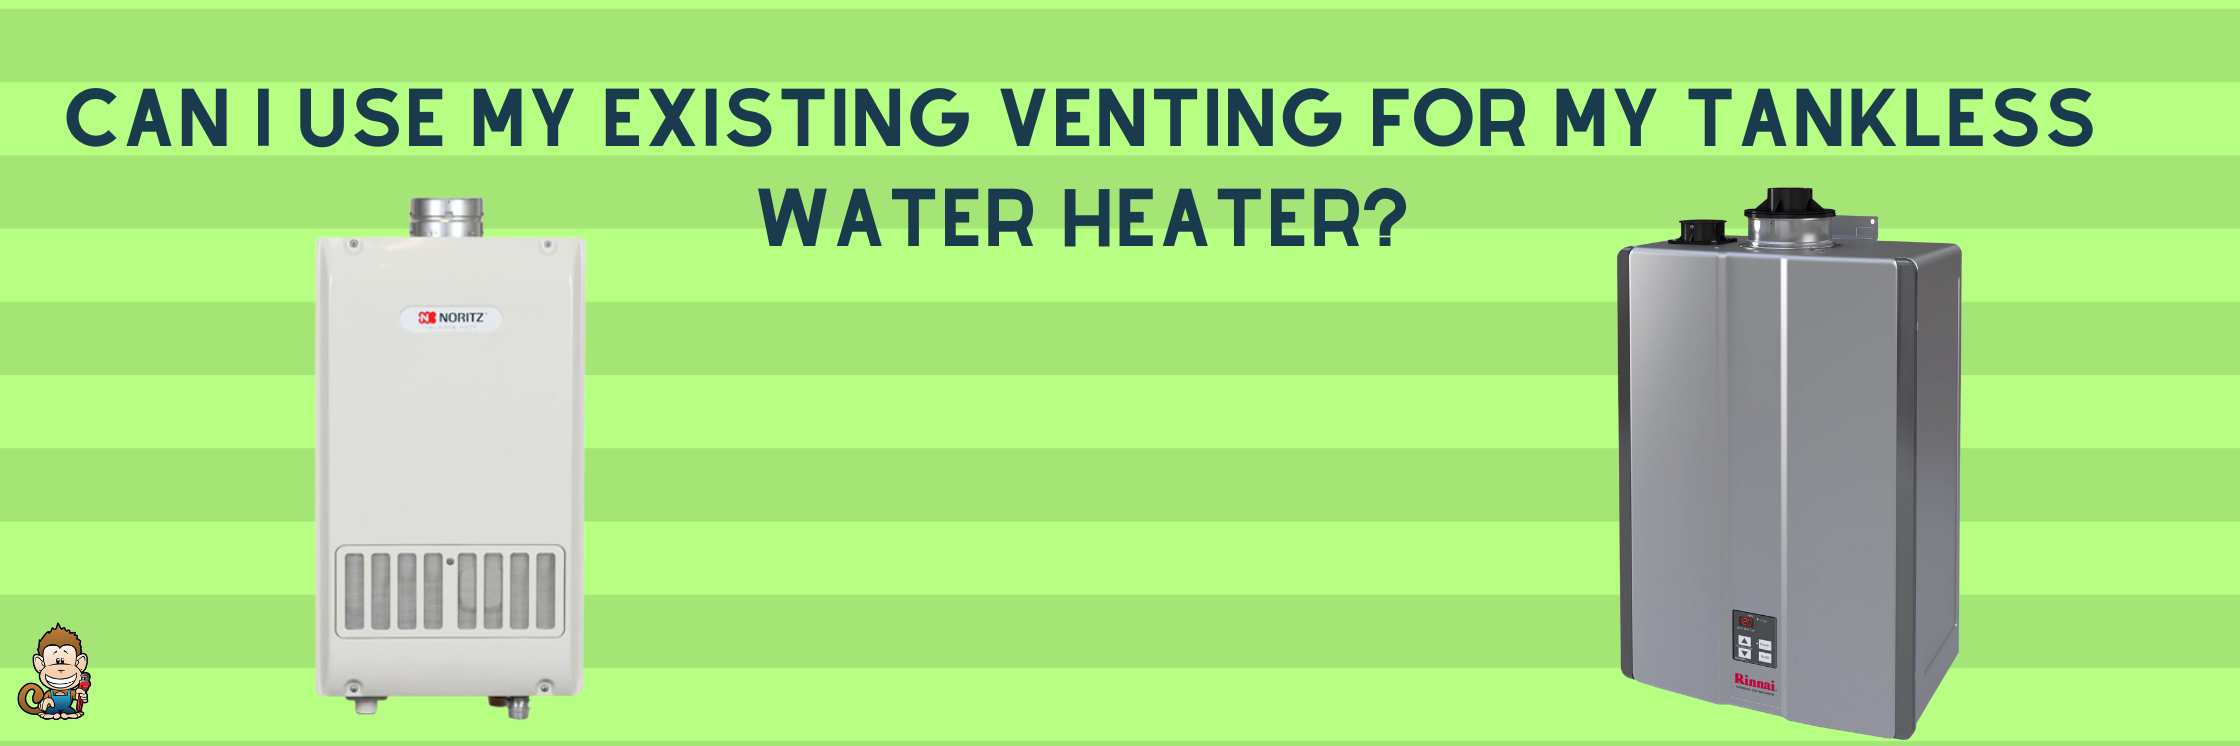 Can I Use My Existing Venting for My Tankless Water Heater?